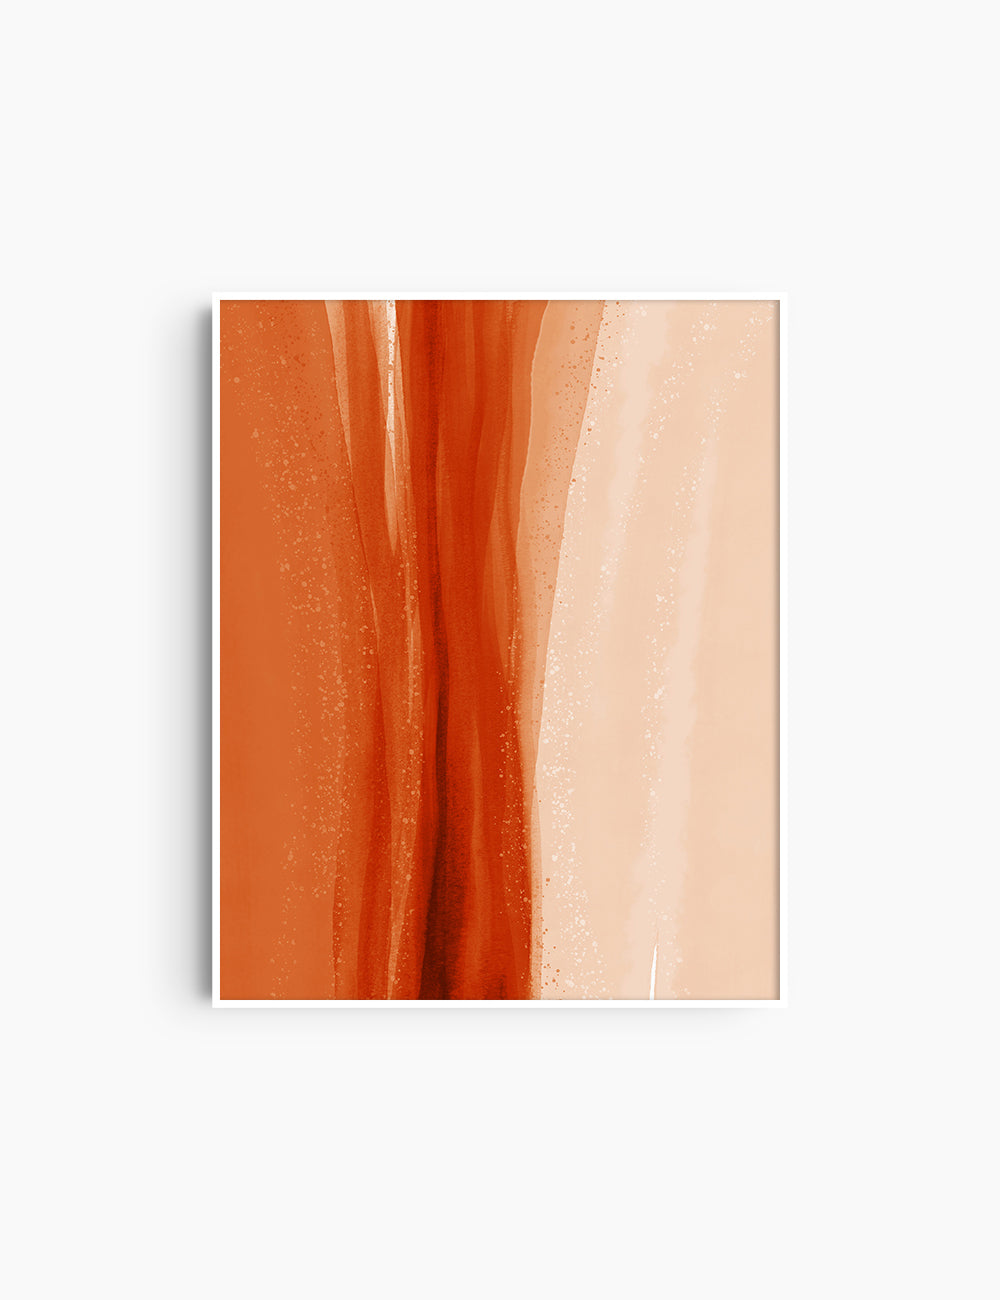 WATERCOLOR ABSTRACT. Burnt Orange Aesthetic. Abstract Watercolor Painting.  Printable Wall Art. – PAPER MOON Art & Design